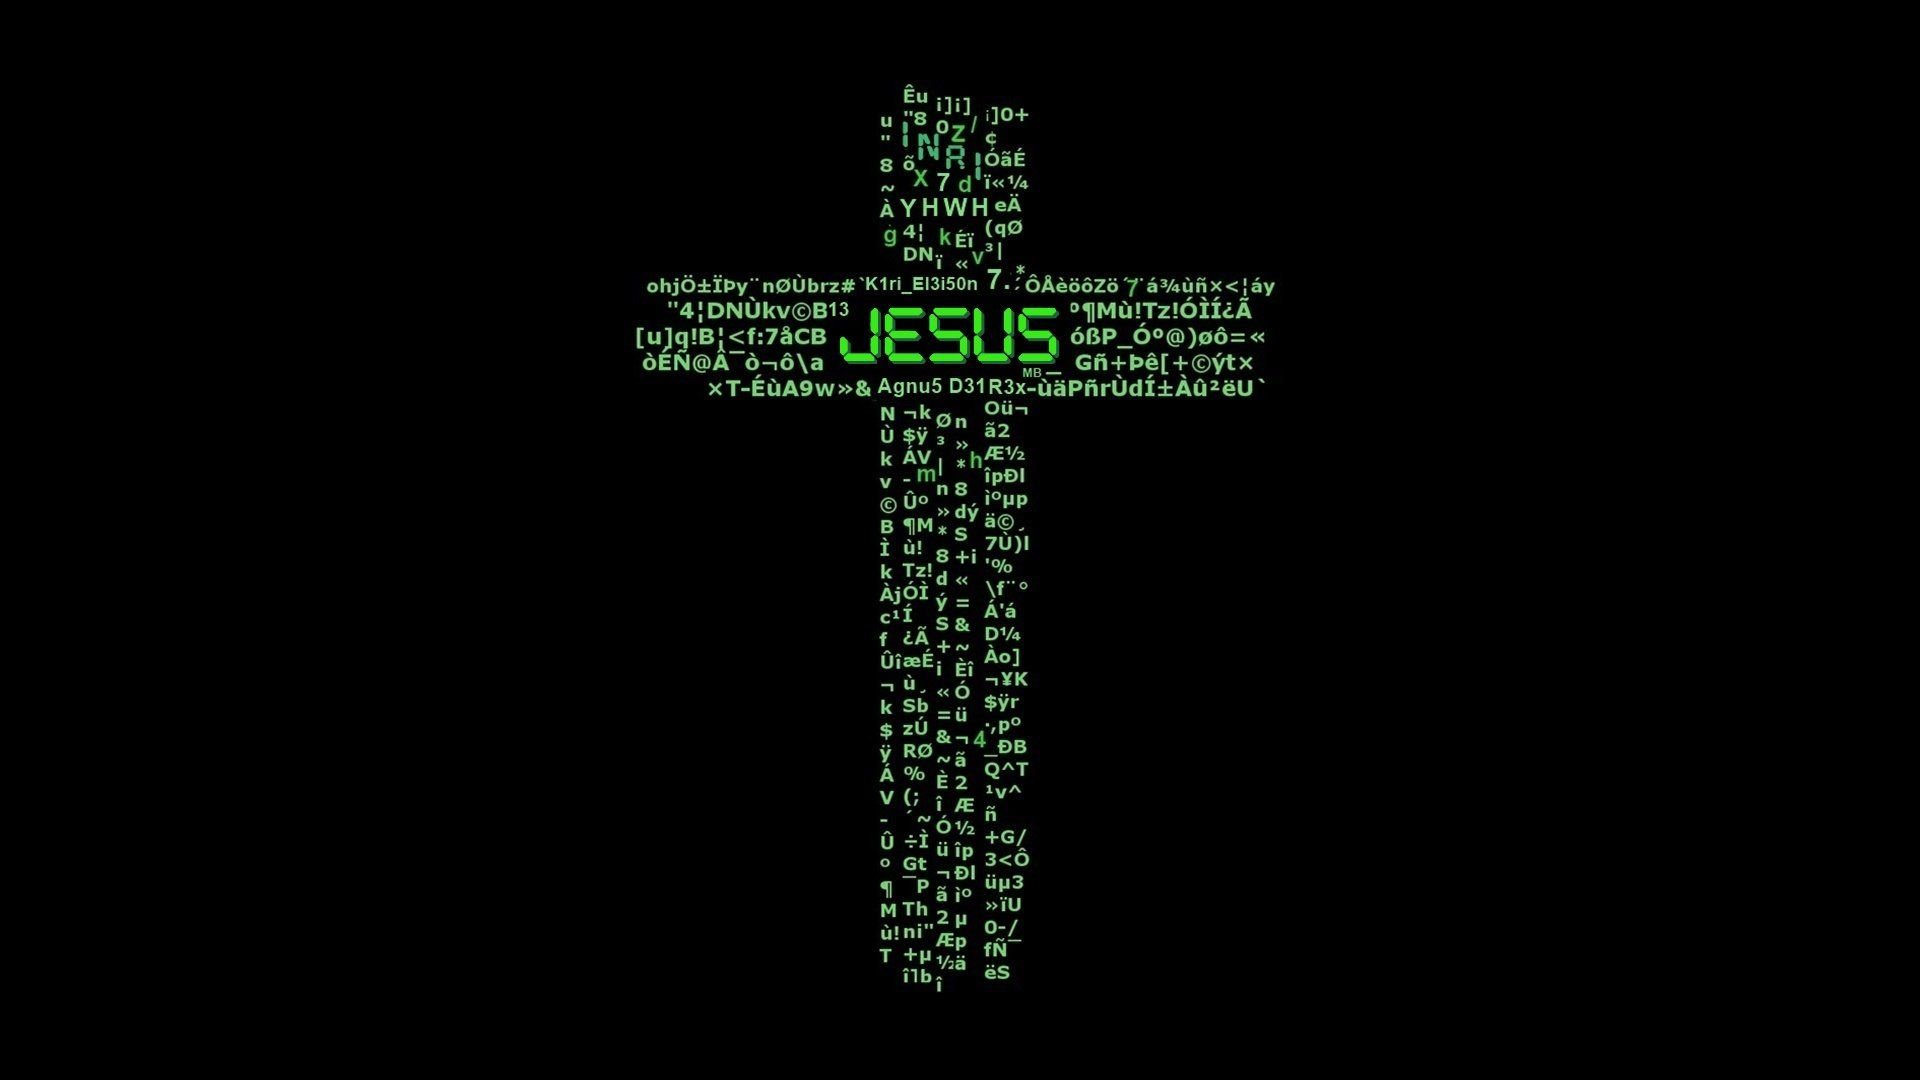 Holy Cross wallpaper by gomez1976  Download on ZEDGE  fd3f